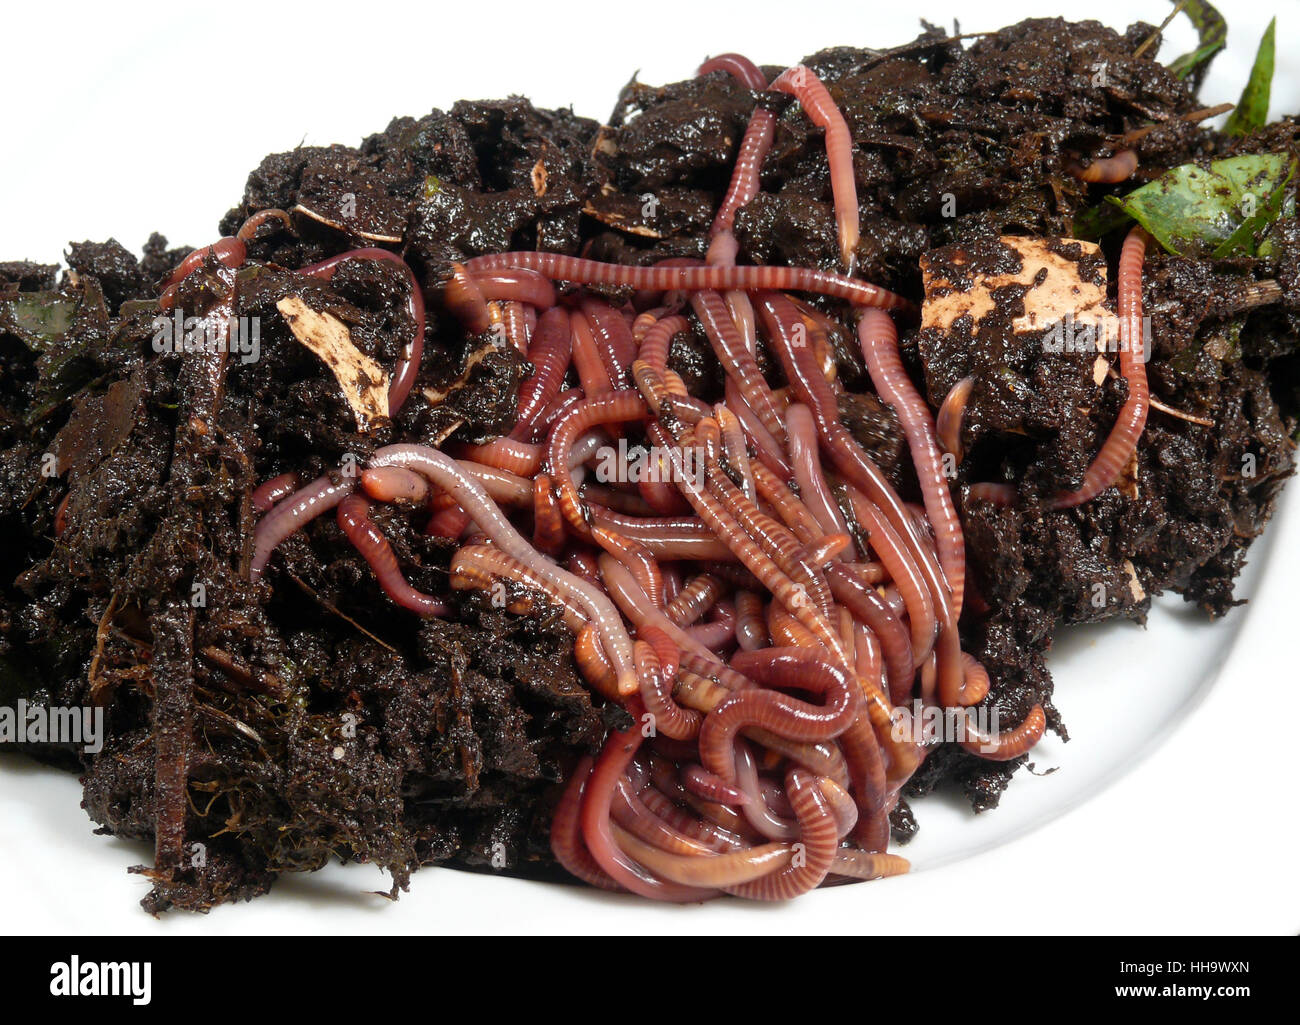 compost worms Stock Photo